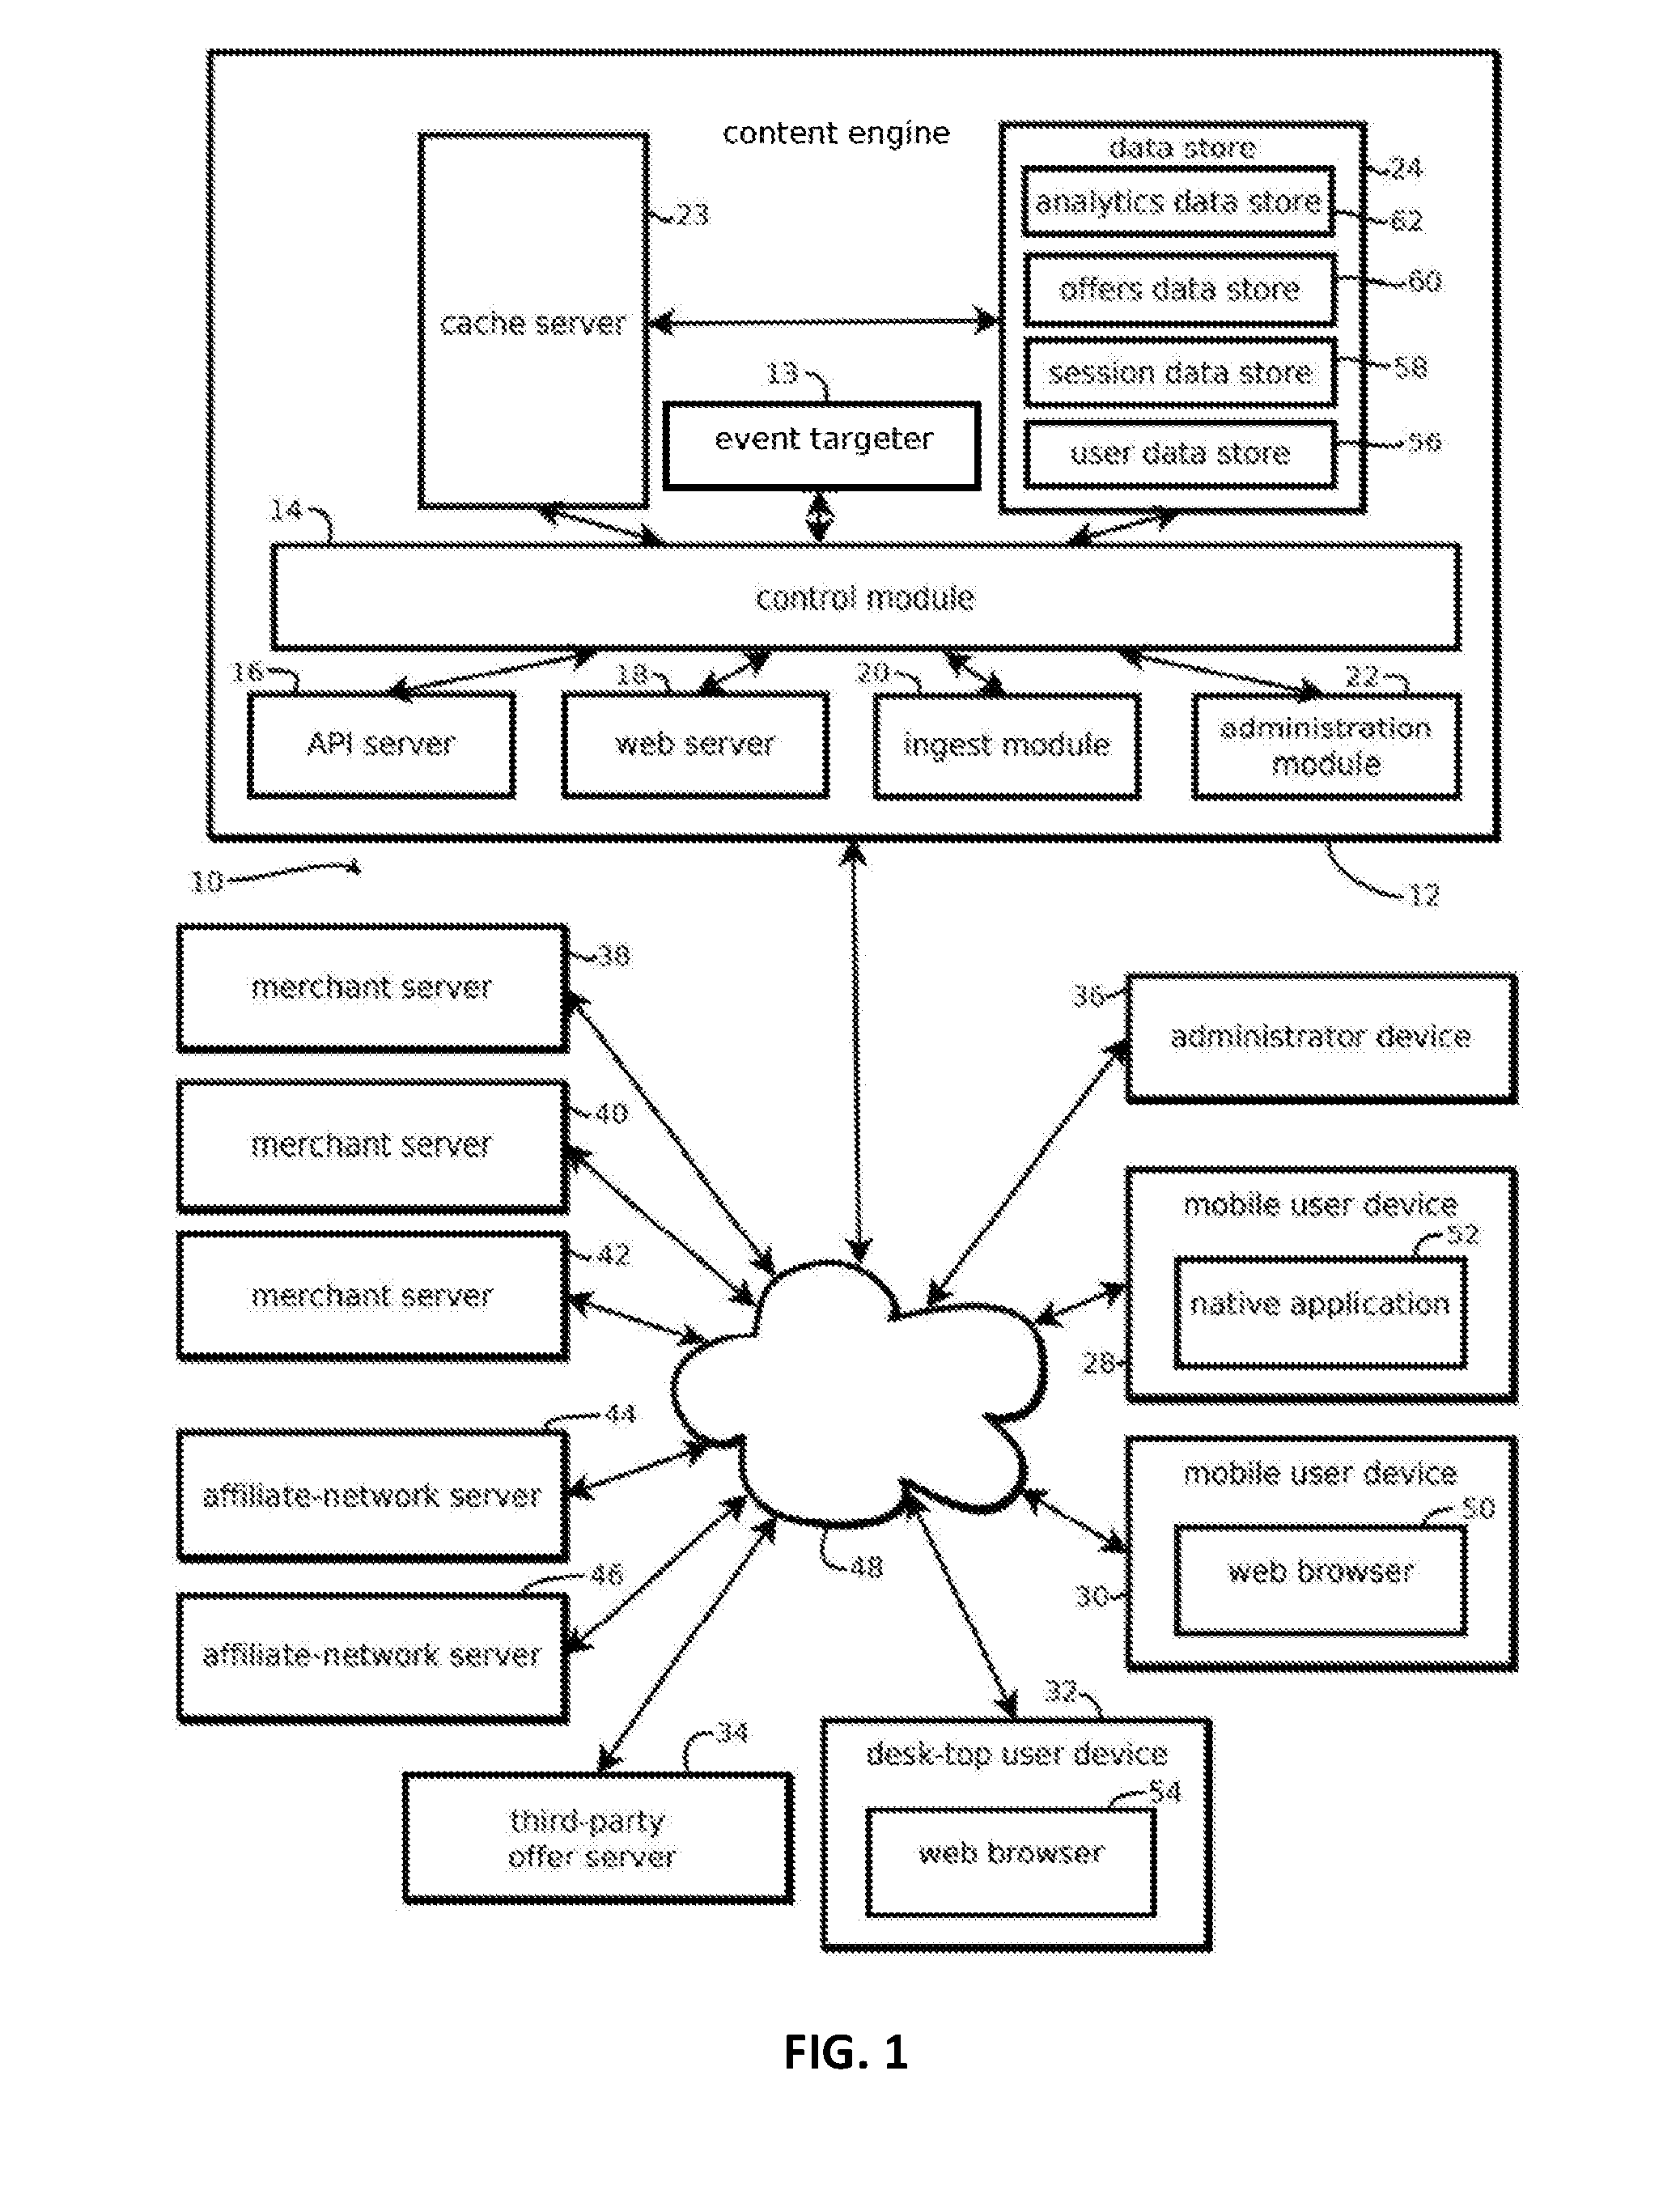 Geotargeting of content by dynamically detecting geographically dense collections of mobile computing devices